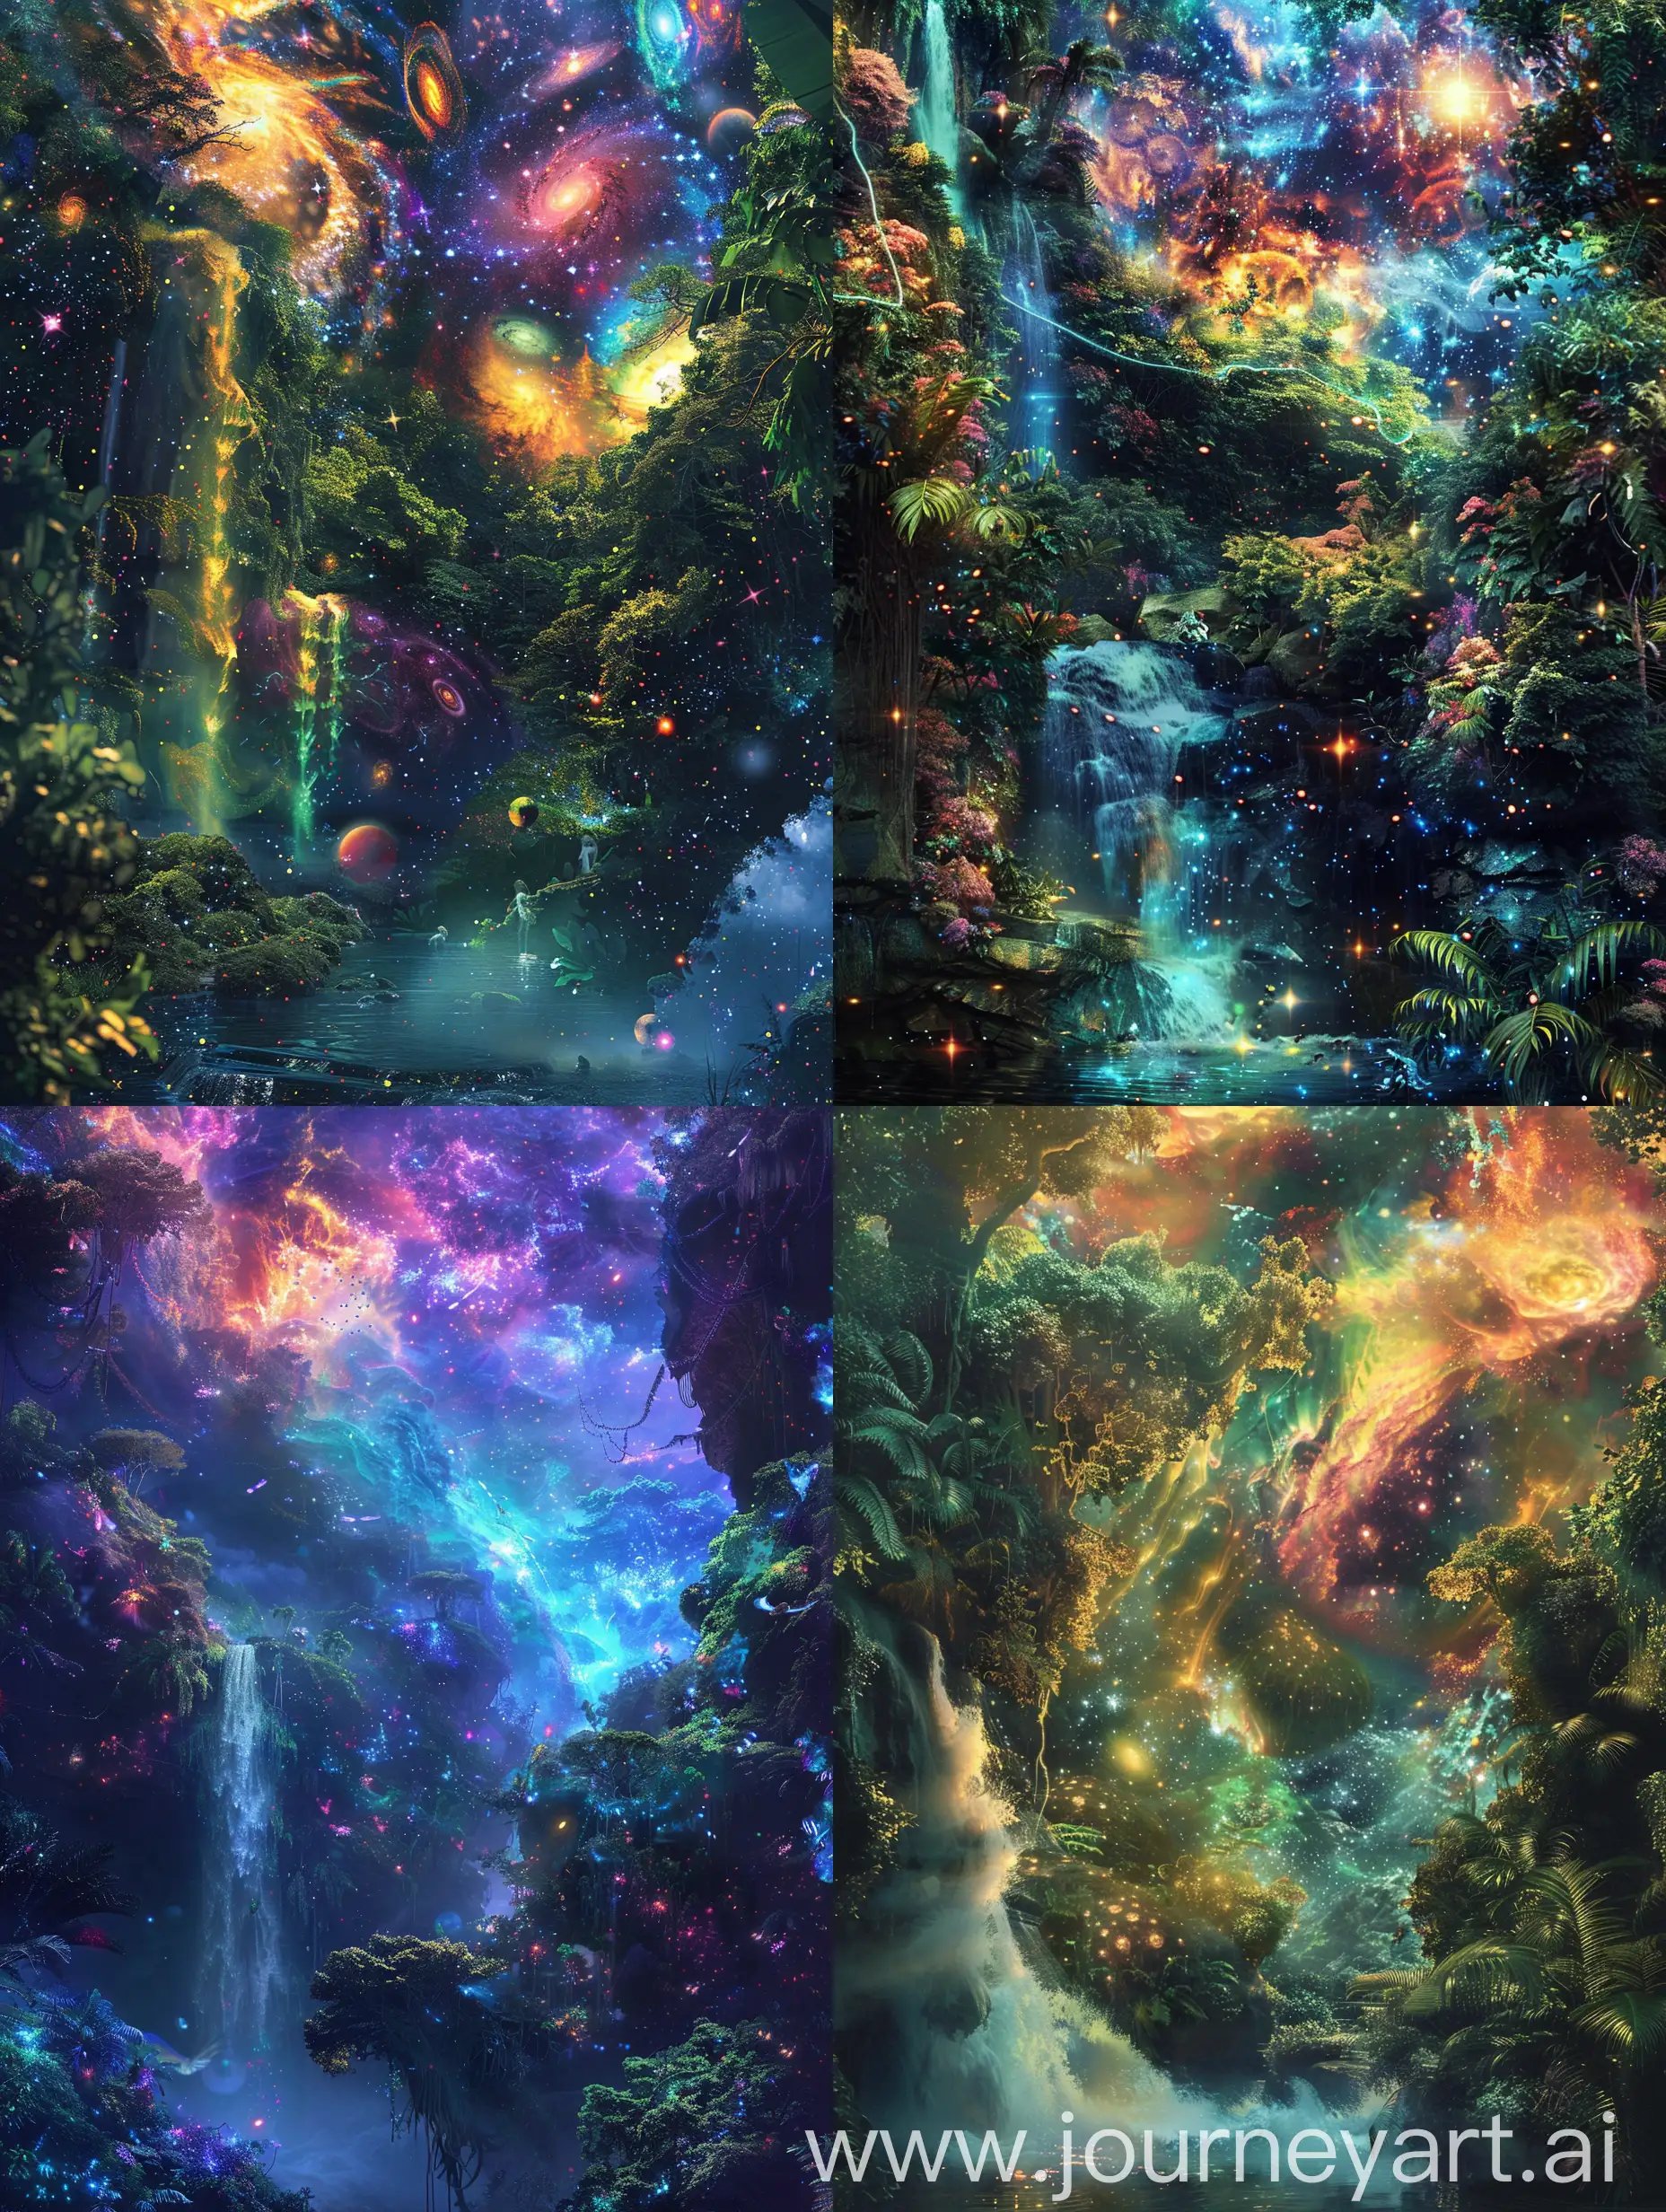 Exploring-Abstract-Universe-in-Vibrant-Galaxy-Jungle-with-Waterfall-Motions